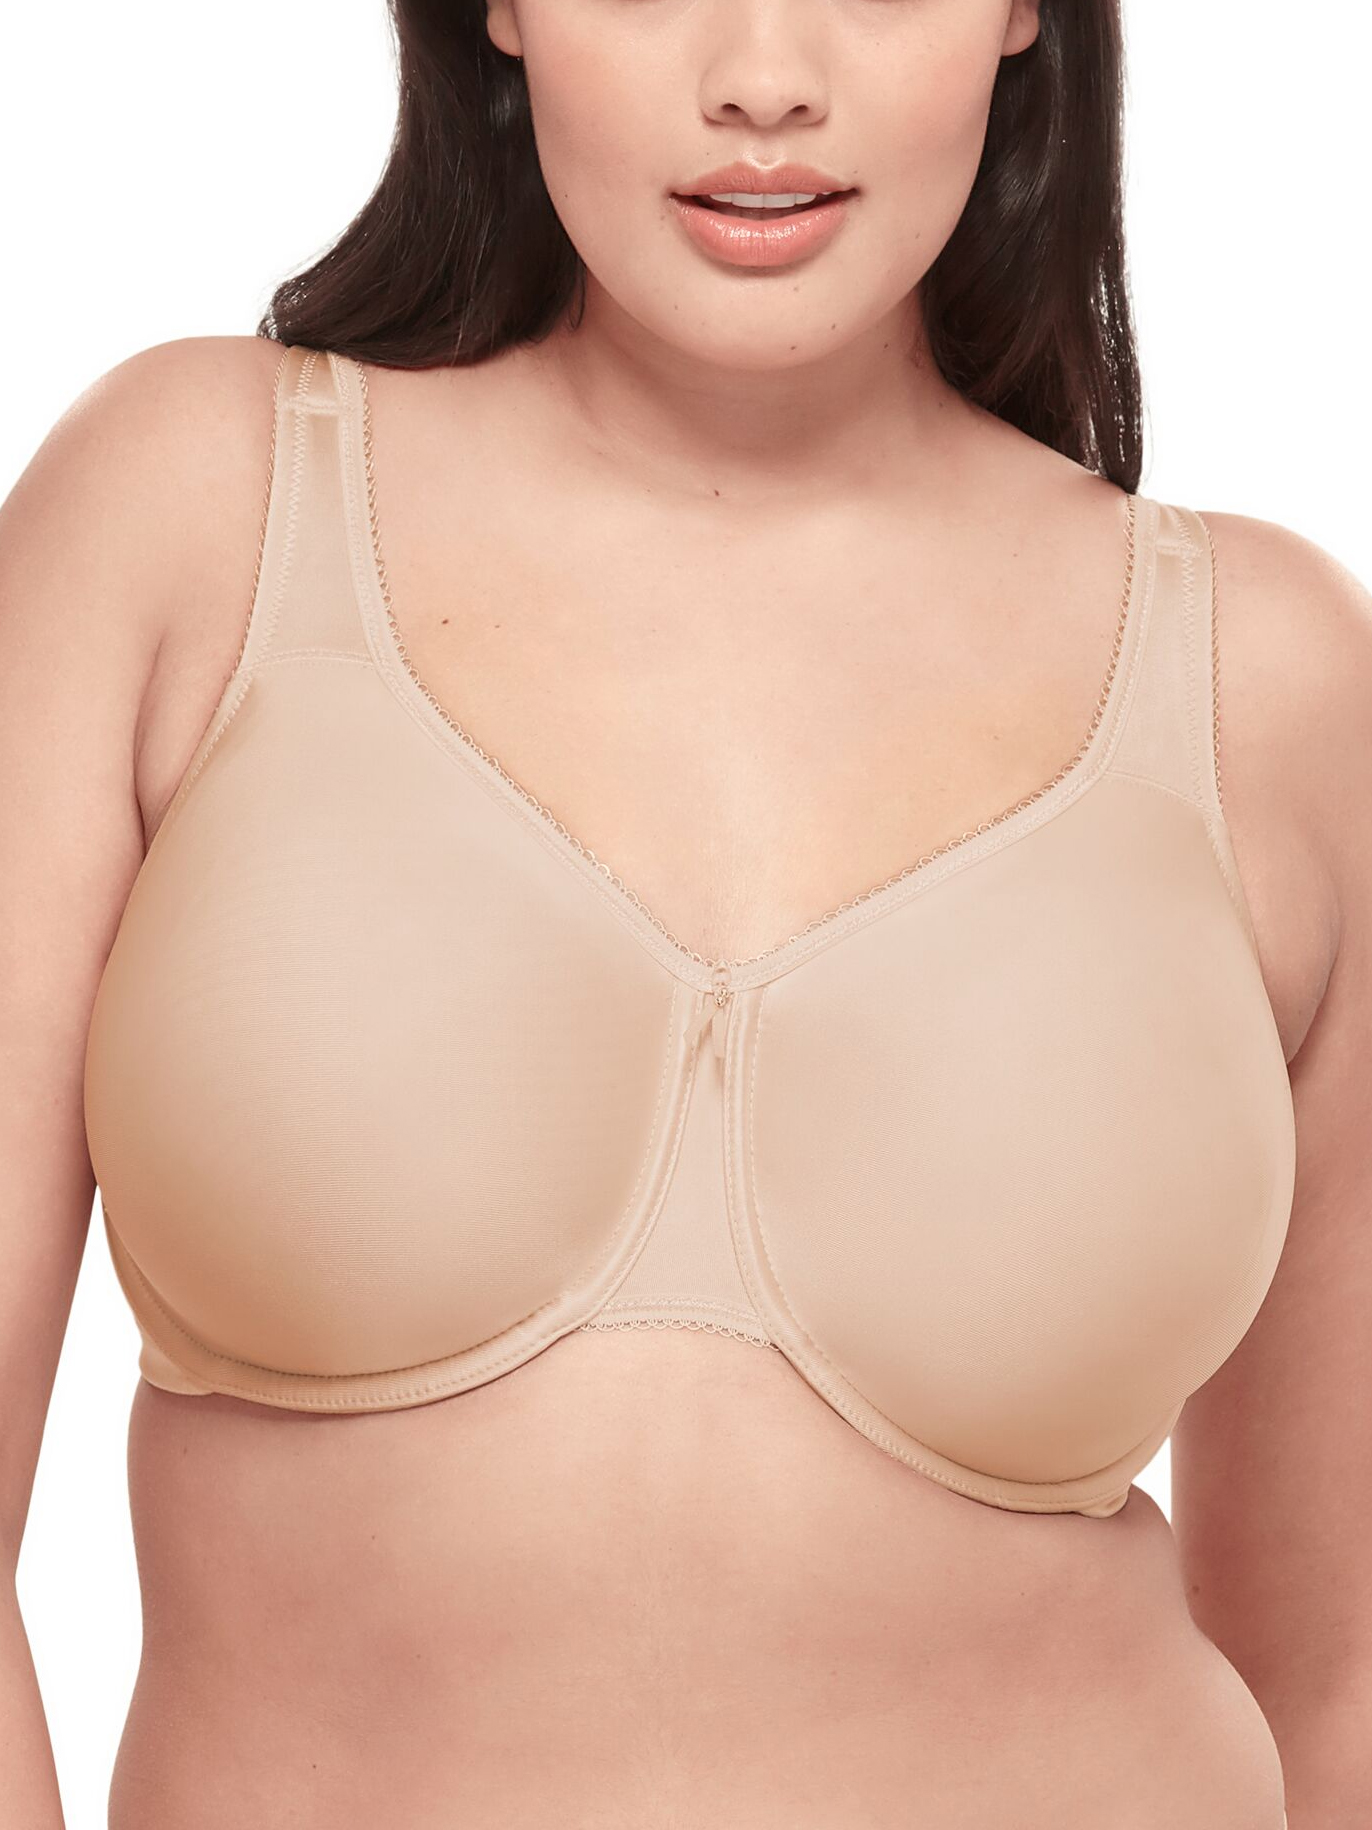 Wacoal 855192 Basic Beauty Full Figure Underwire Bra 34 G Naturally Nude  34g for sale online